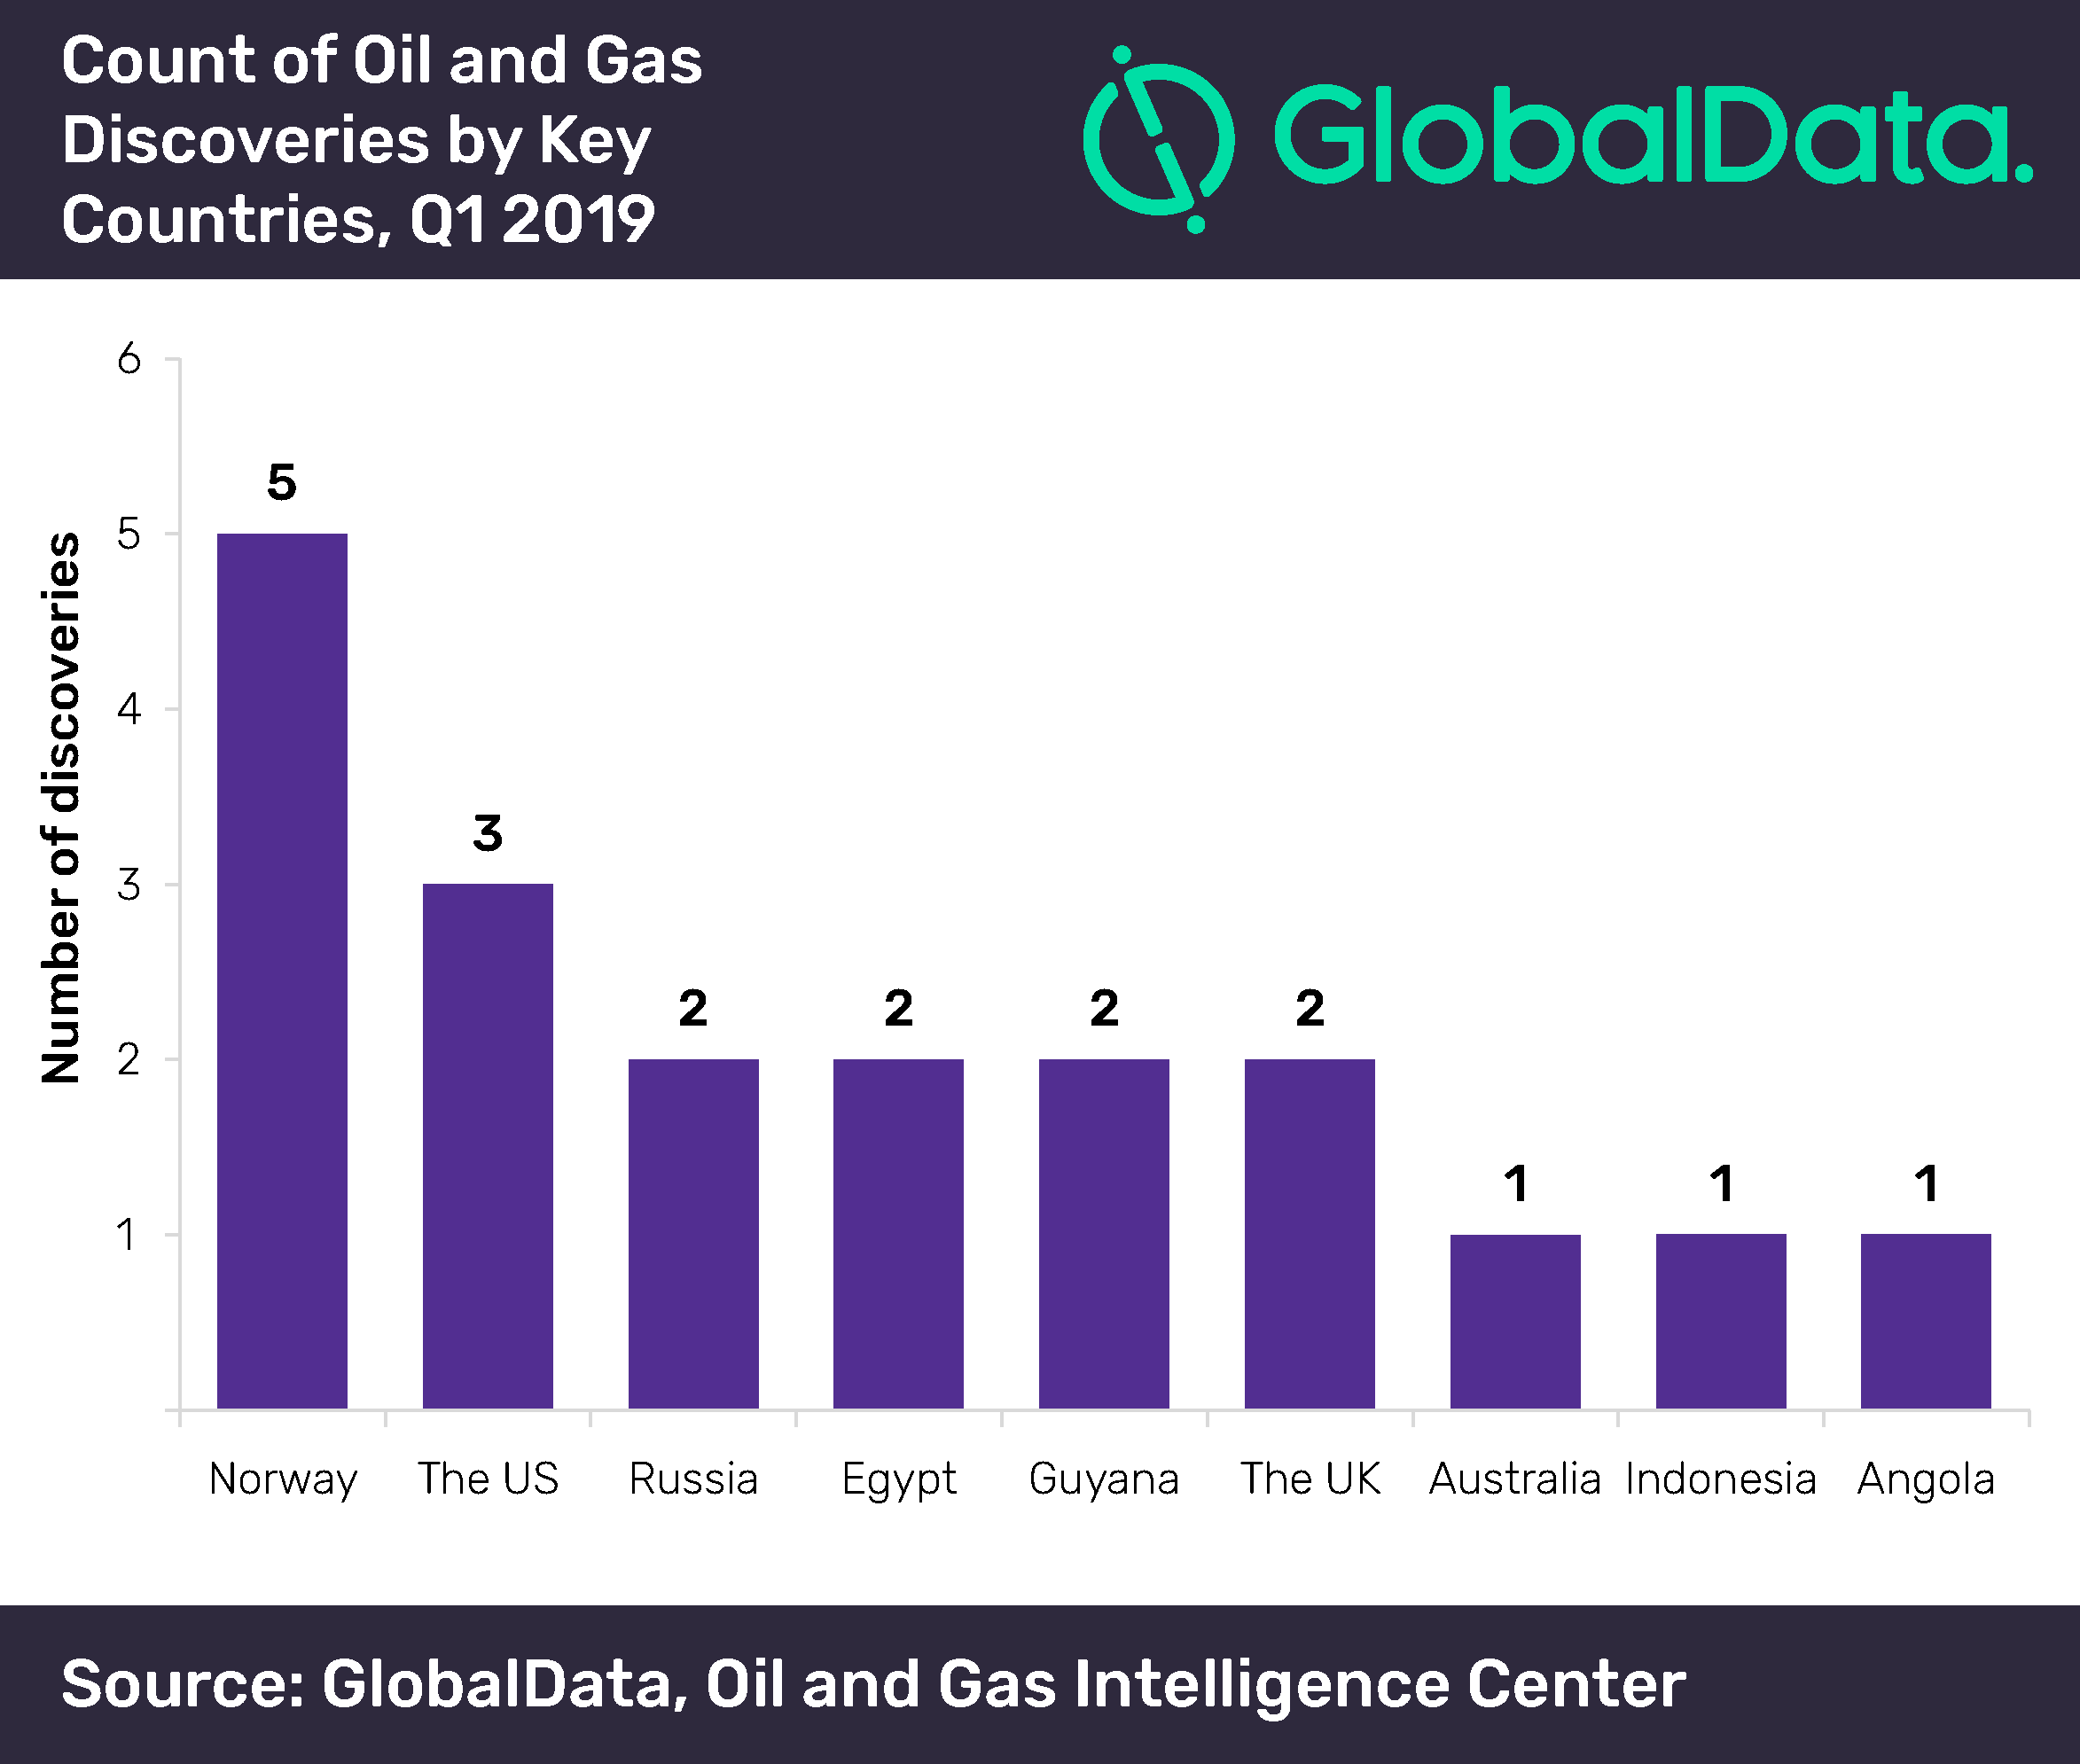 Norway leads globally with highest number of oil and gas discoveries in Q1 2019